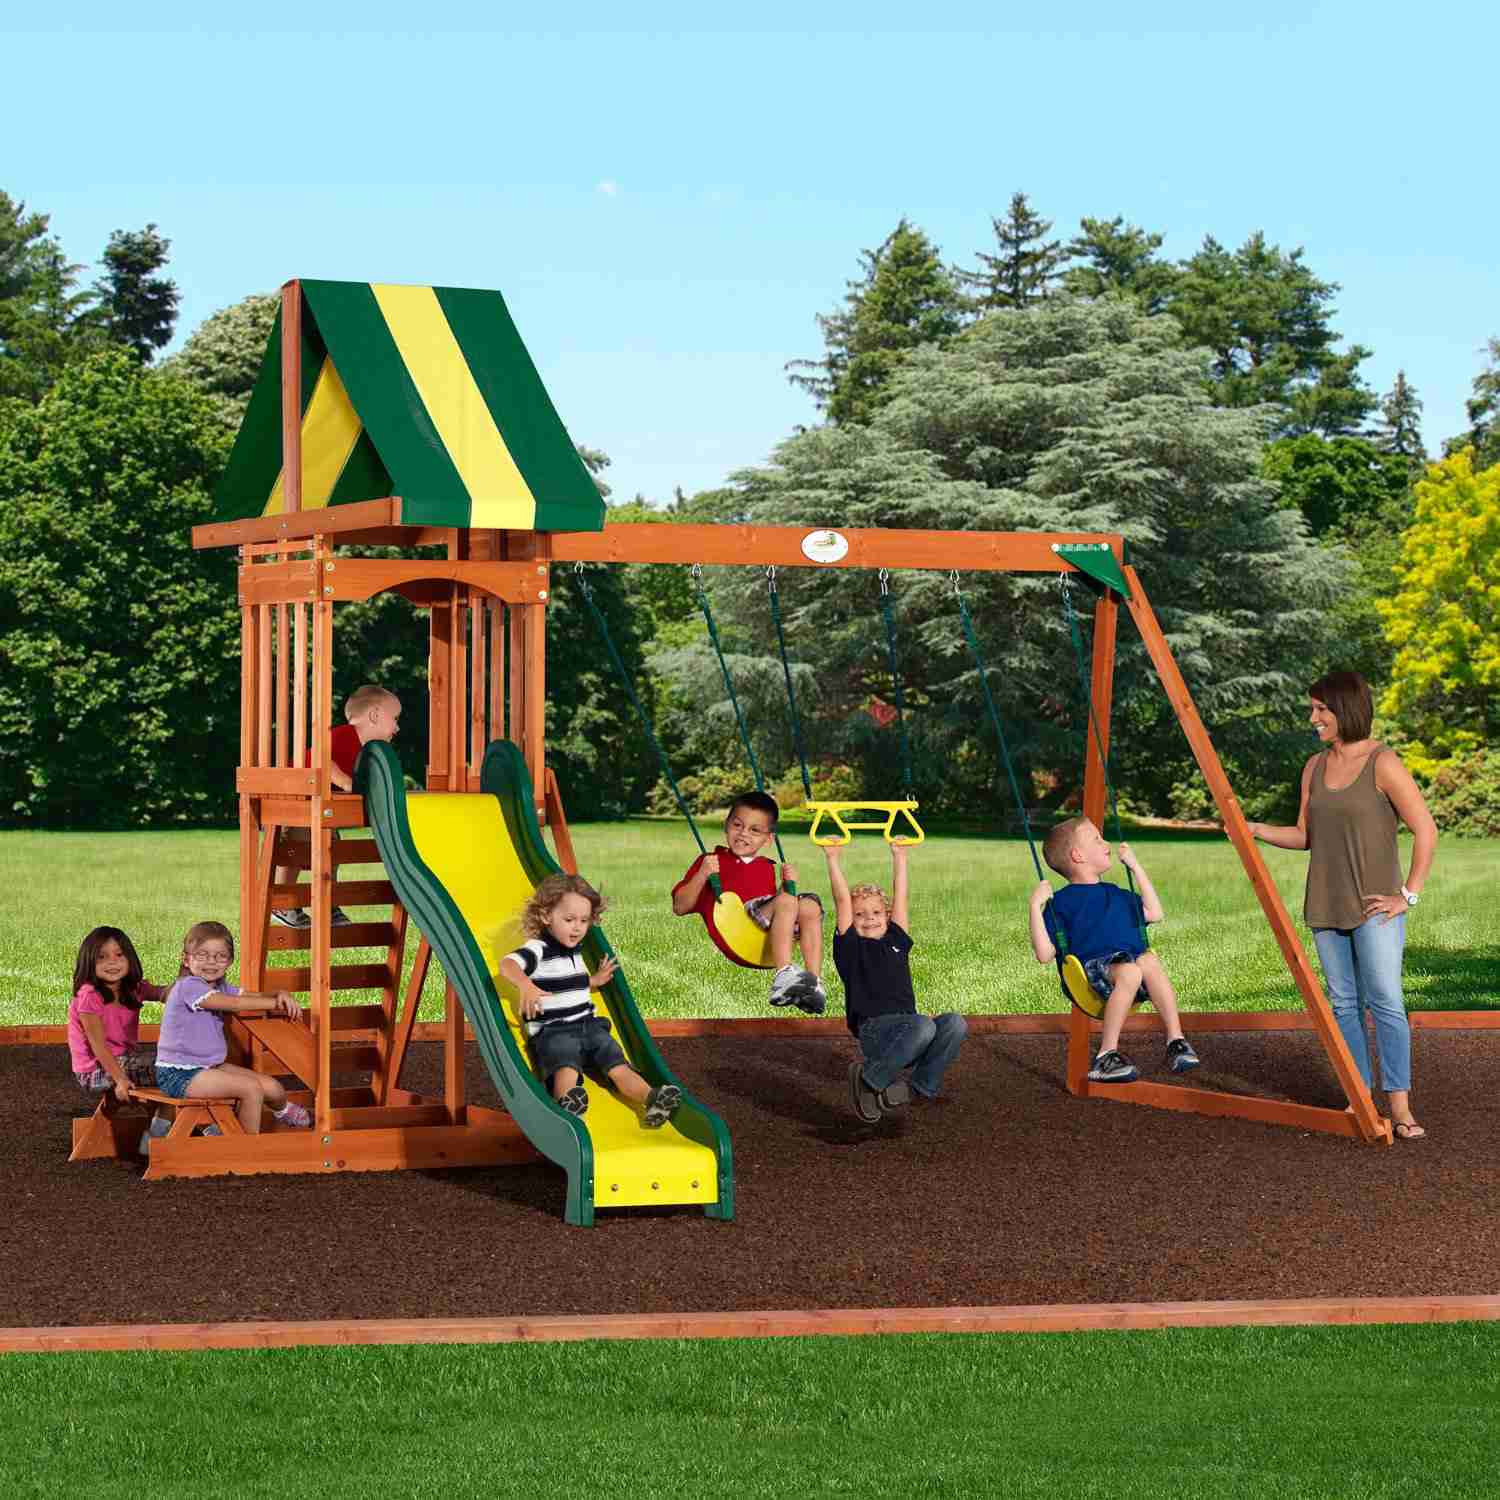 Best Playset For Backyard
 The 8 Best Wooden Swing Sets and Playsets to Buy in 2018